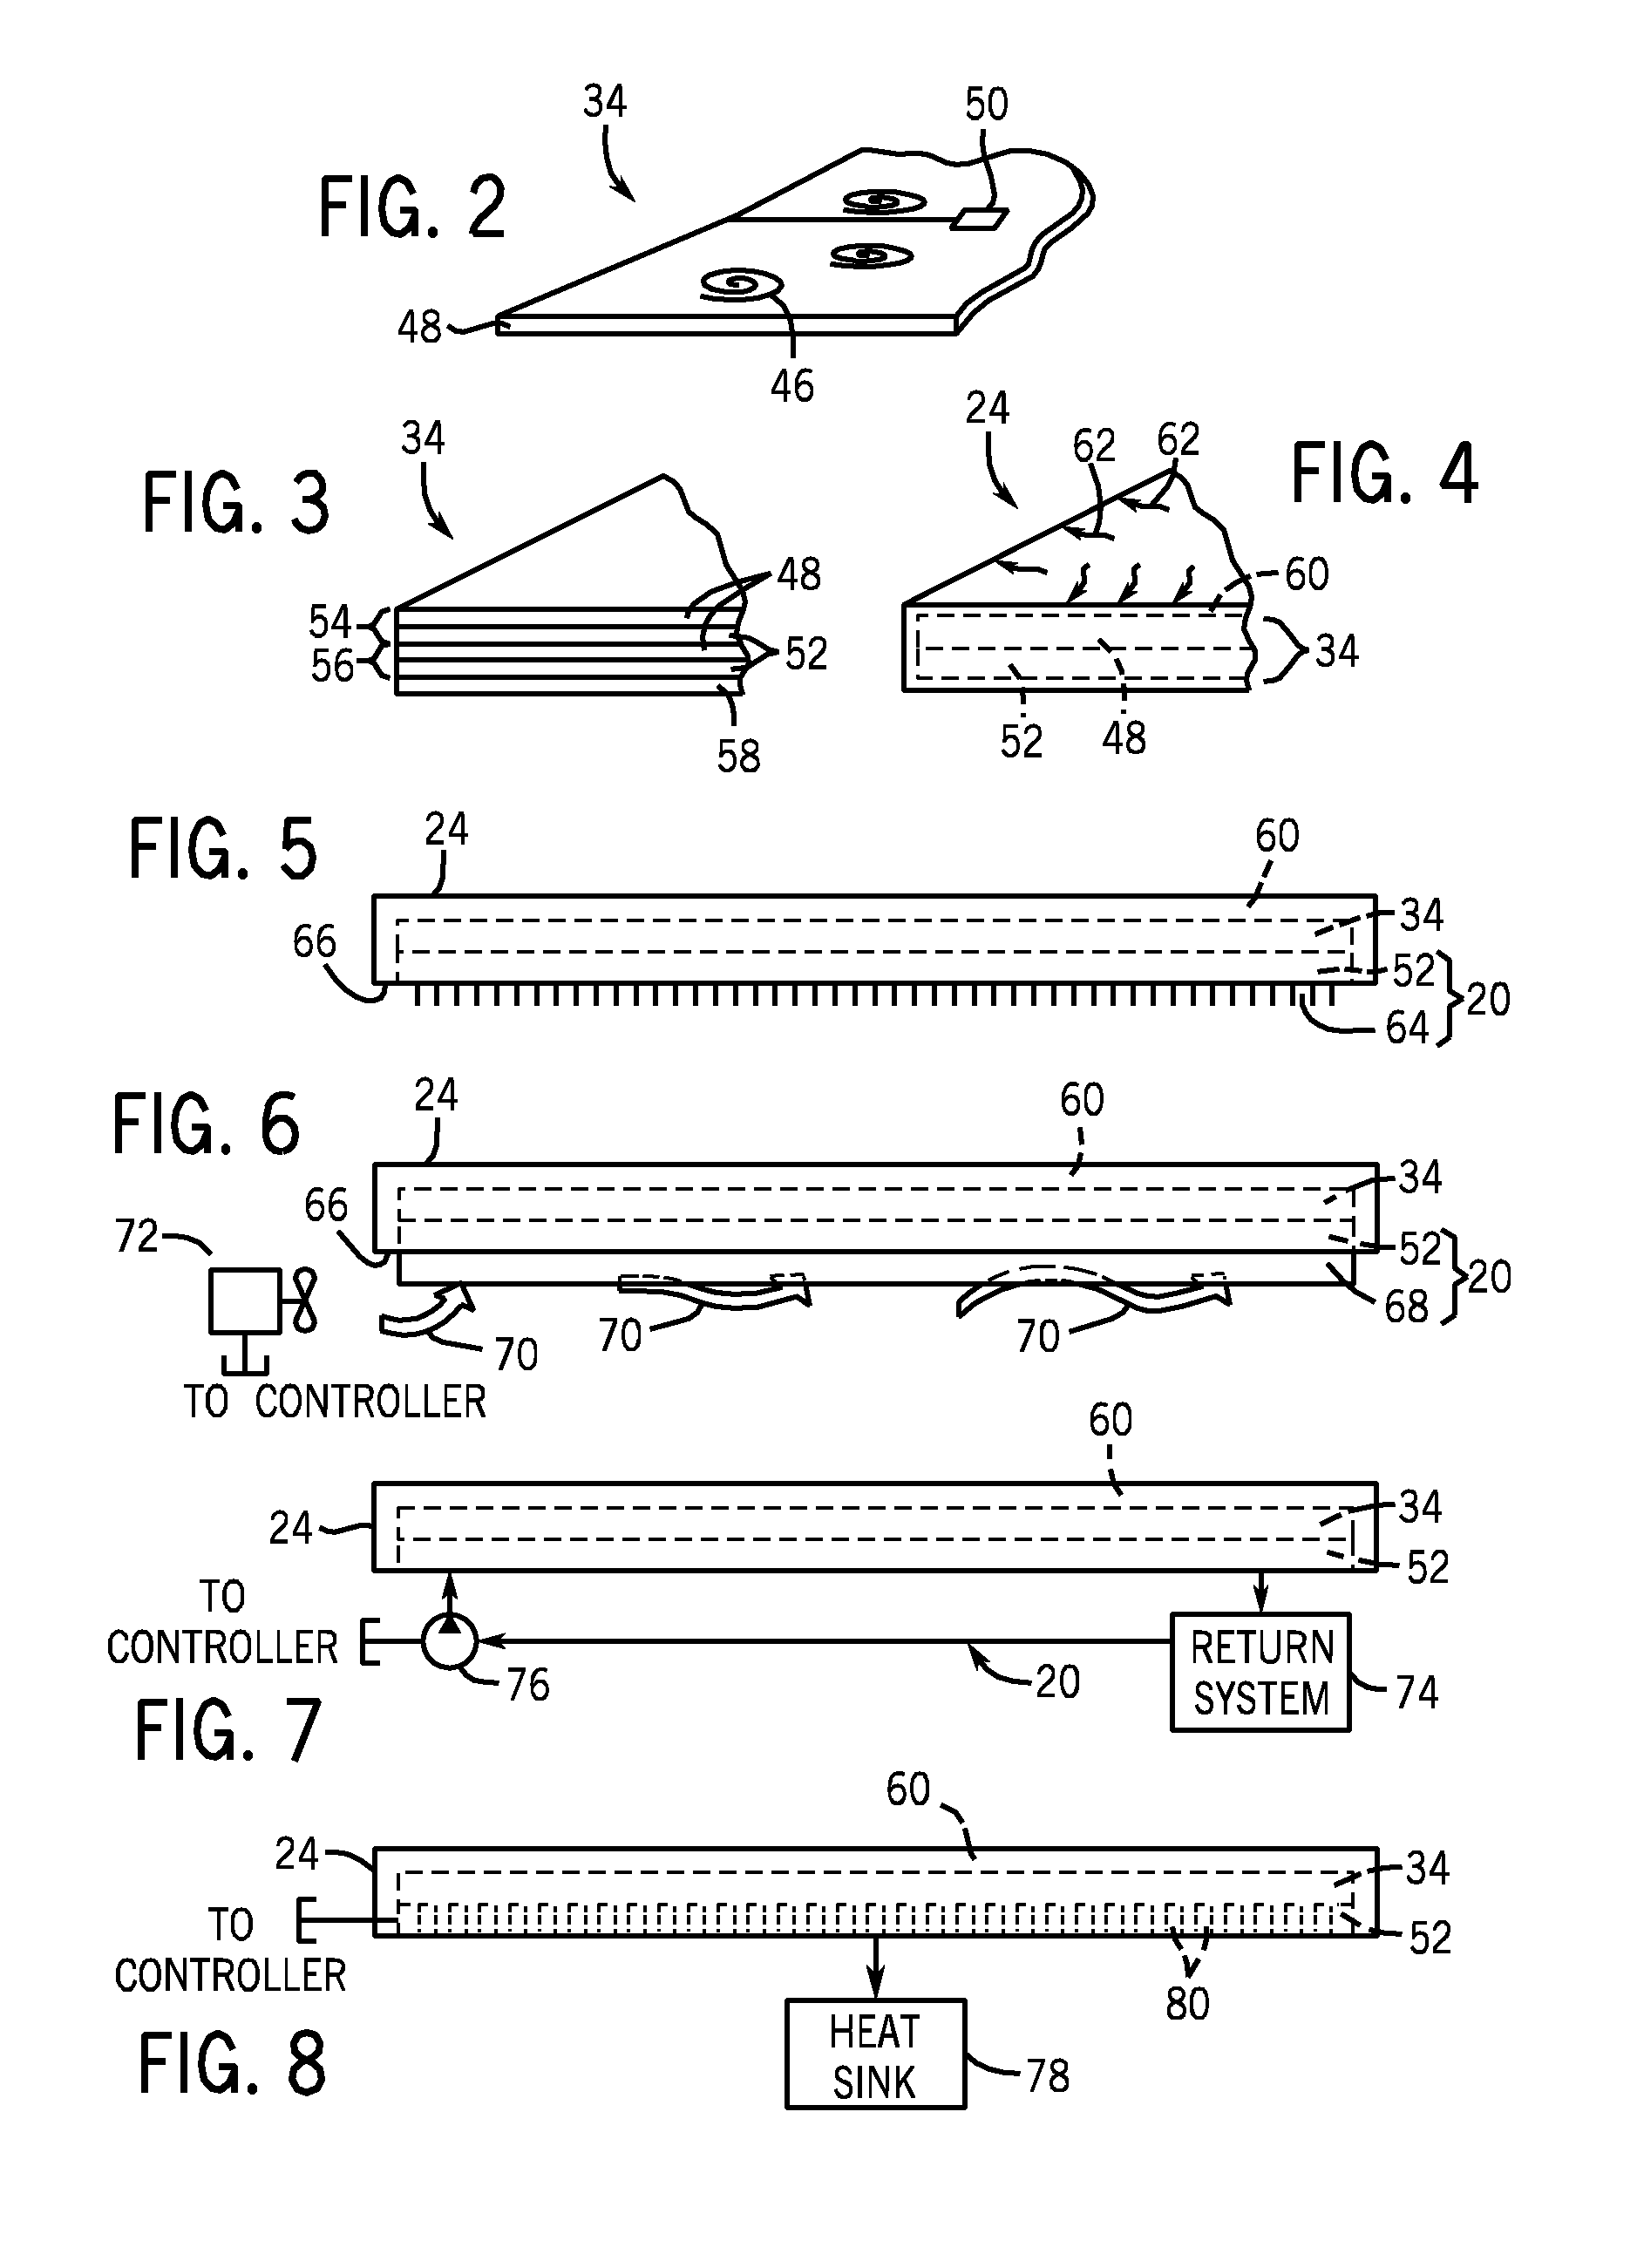 System and method for cooling components of a surgical navigation system